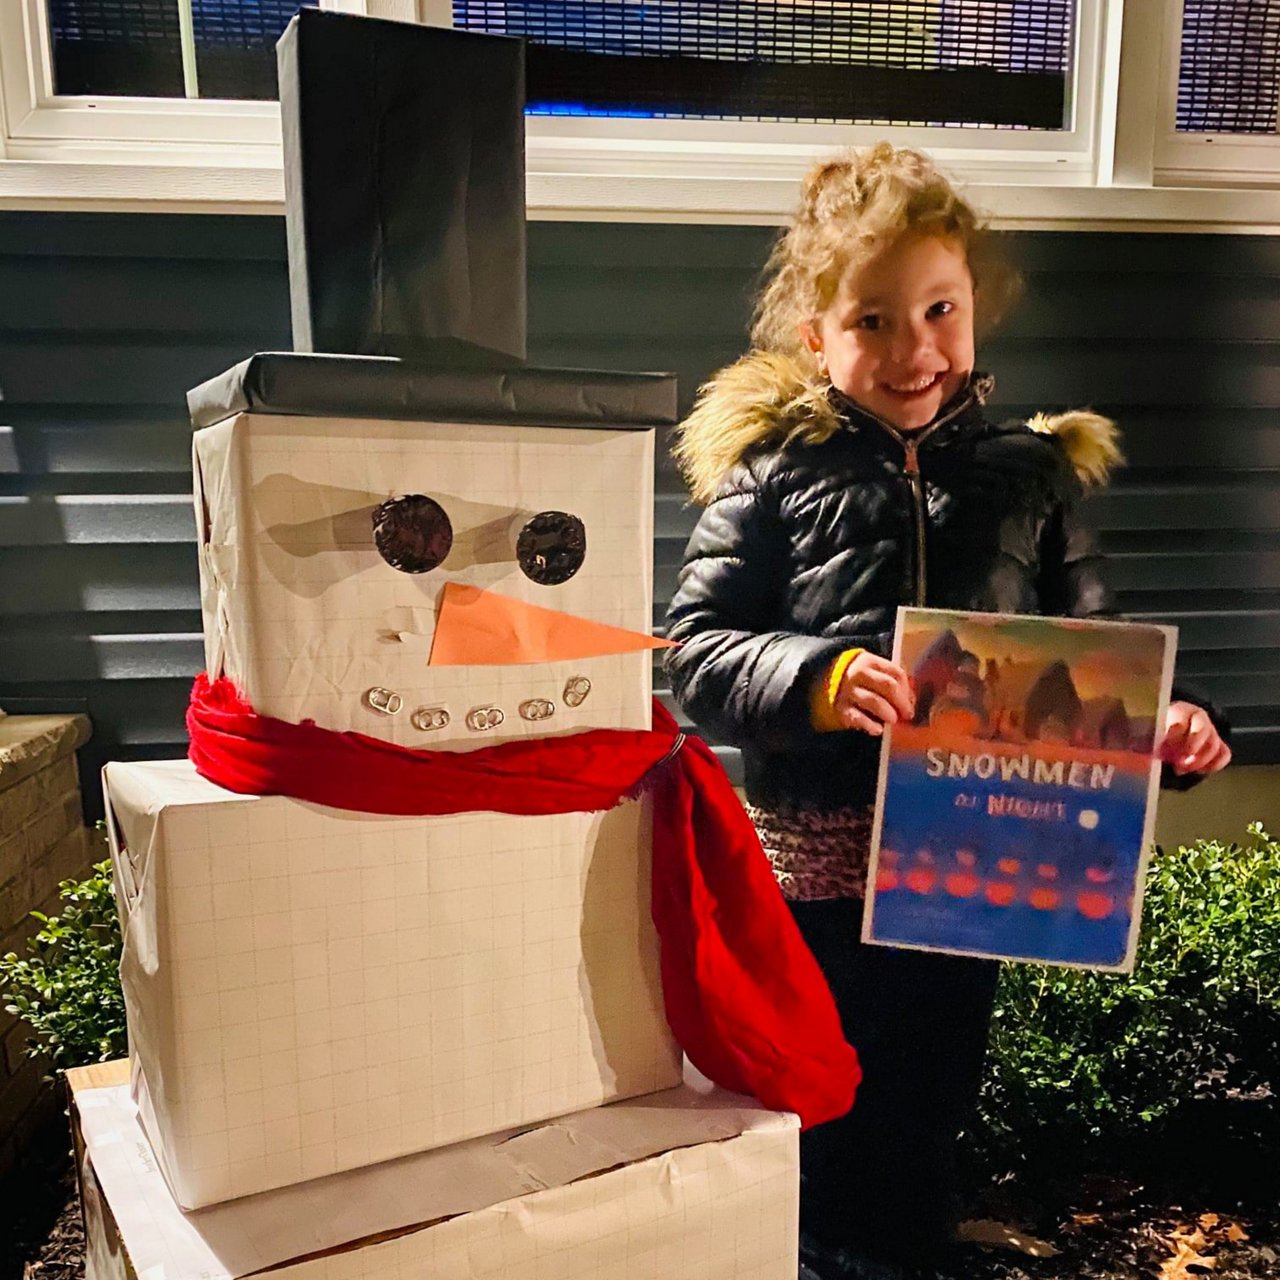 A young girls standing next to a snowman made out of cardboard boxes